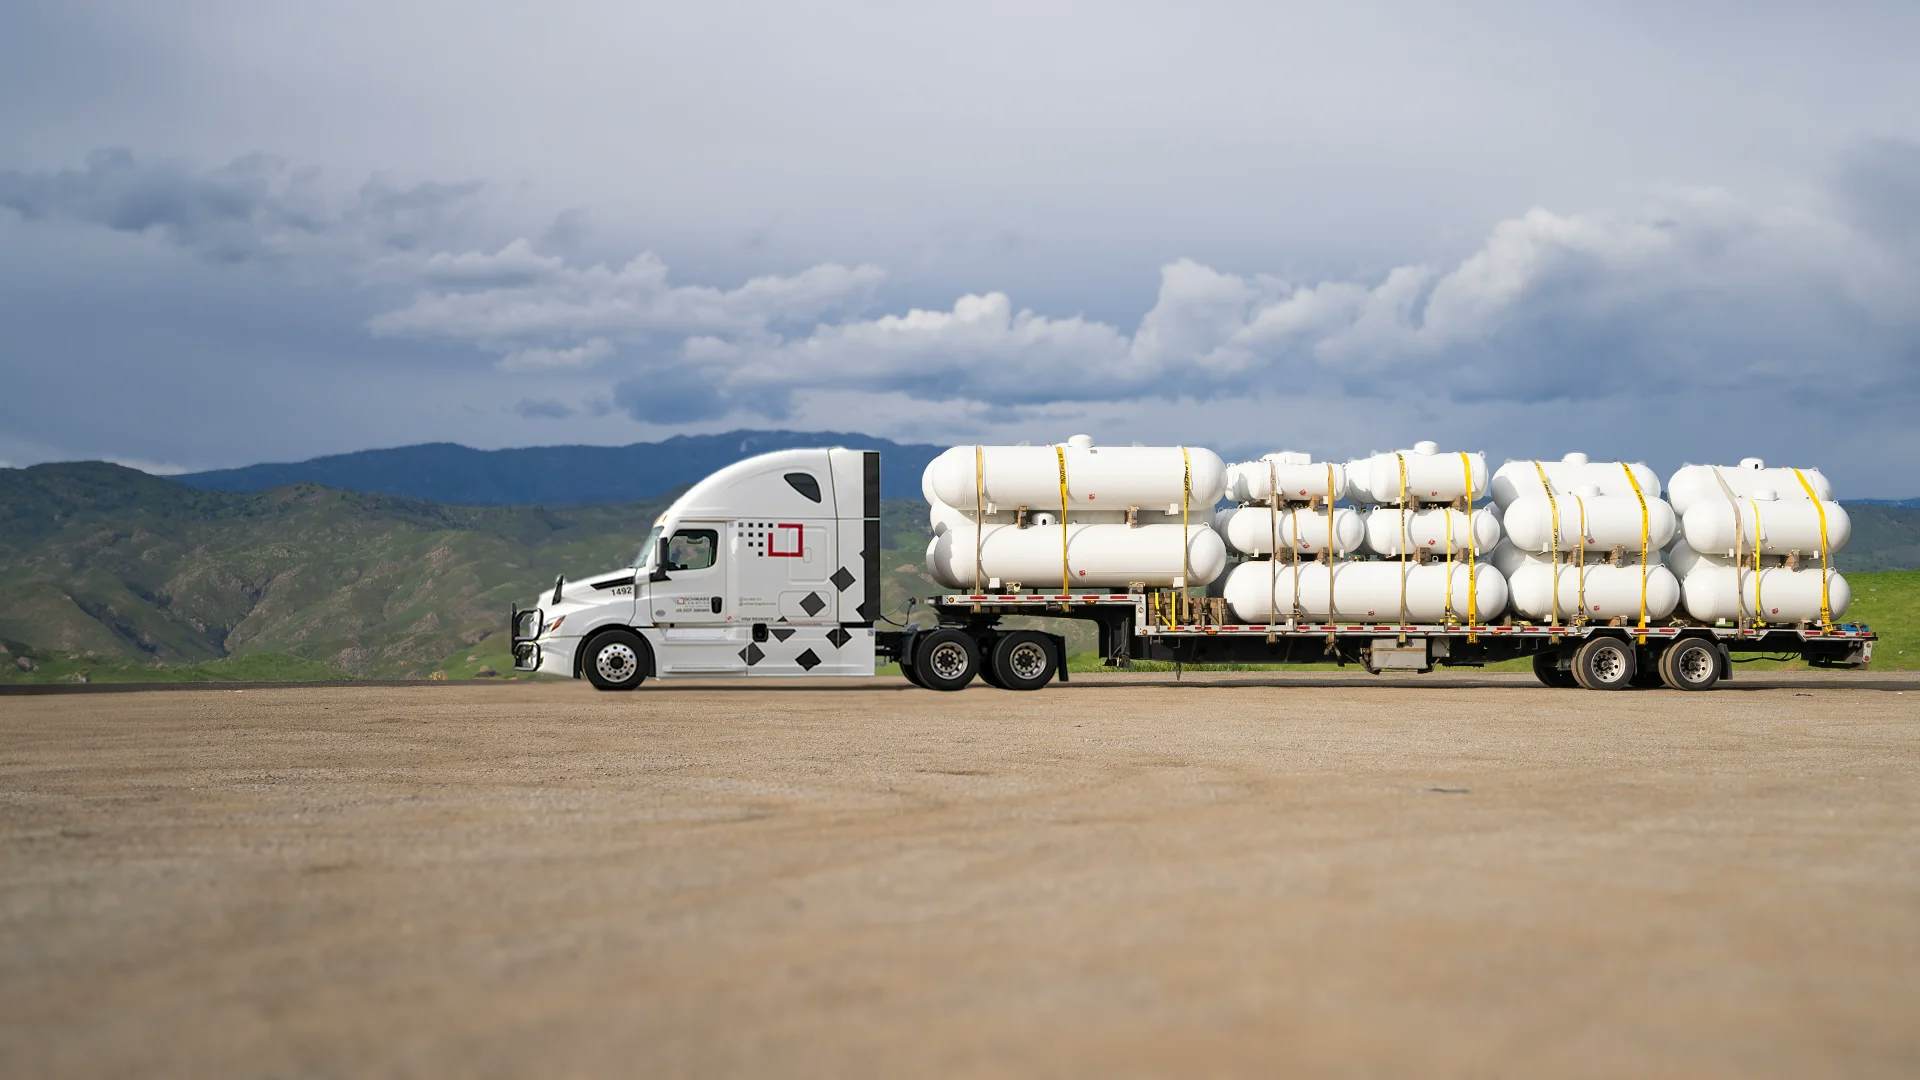 A white semi-truck hauling a flatbed trailer loaded with multiple large white industrial tanks, secured with yellow straps. The truck is parked on a concrete ground with a dramatic backdrop of dark storm clouds gathering over green hills, conveying a sense of impending weather challenge during transportation.